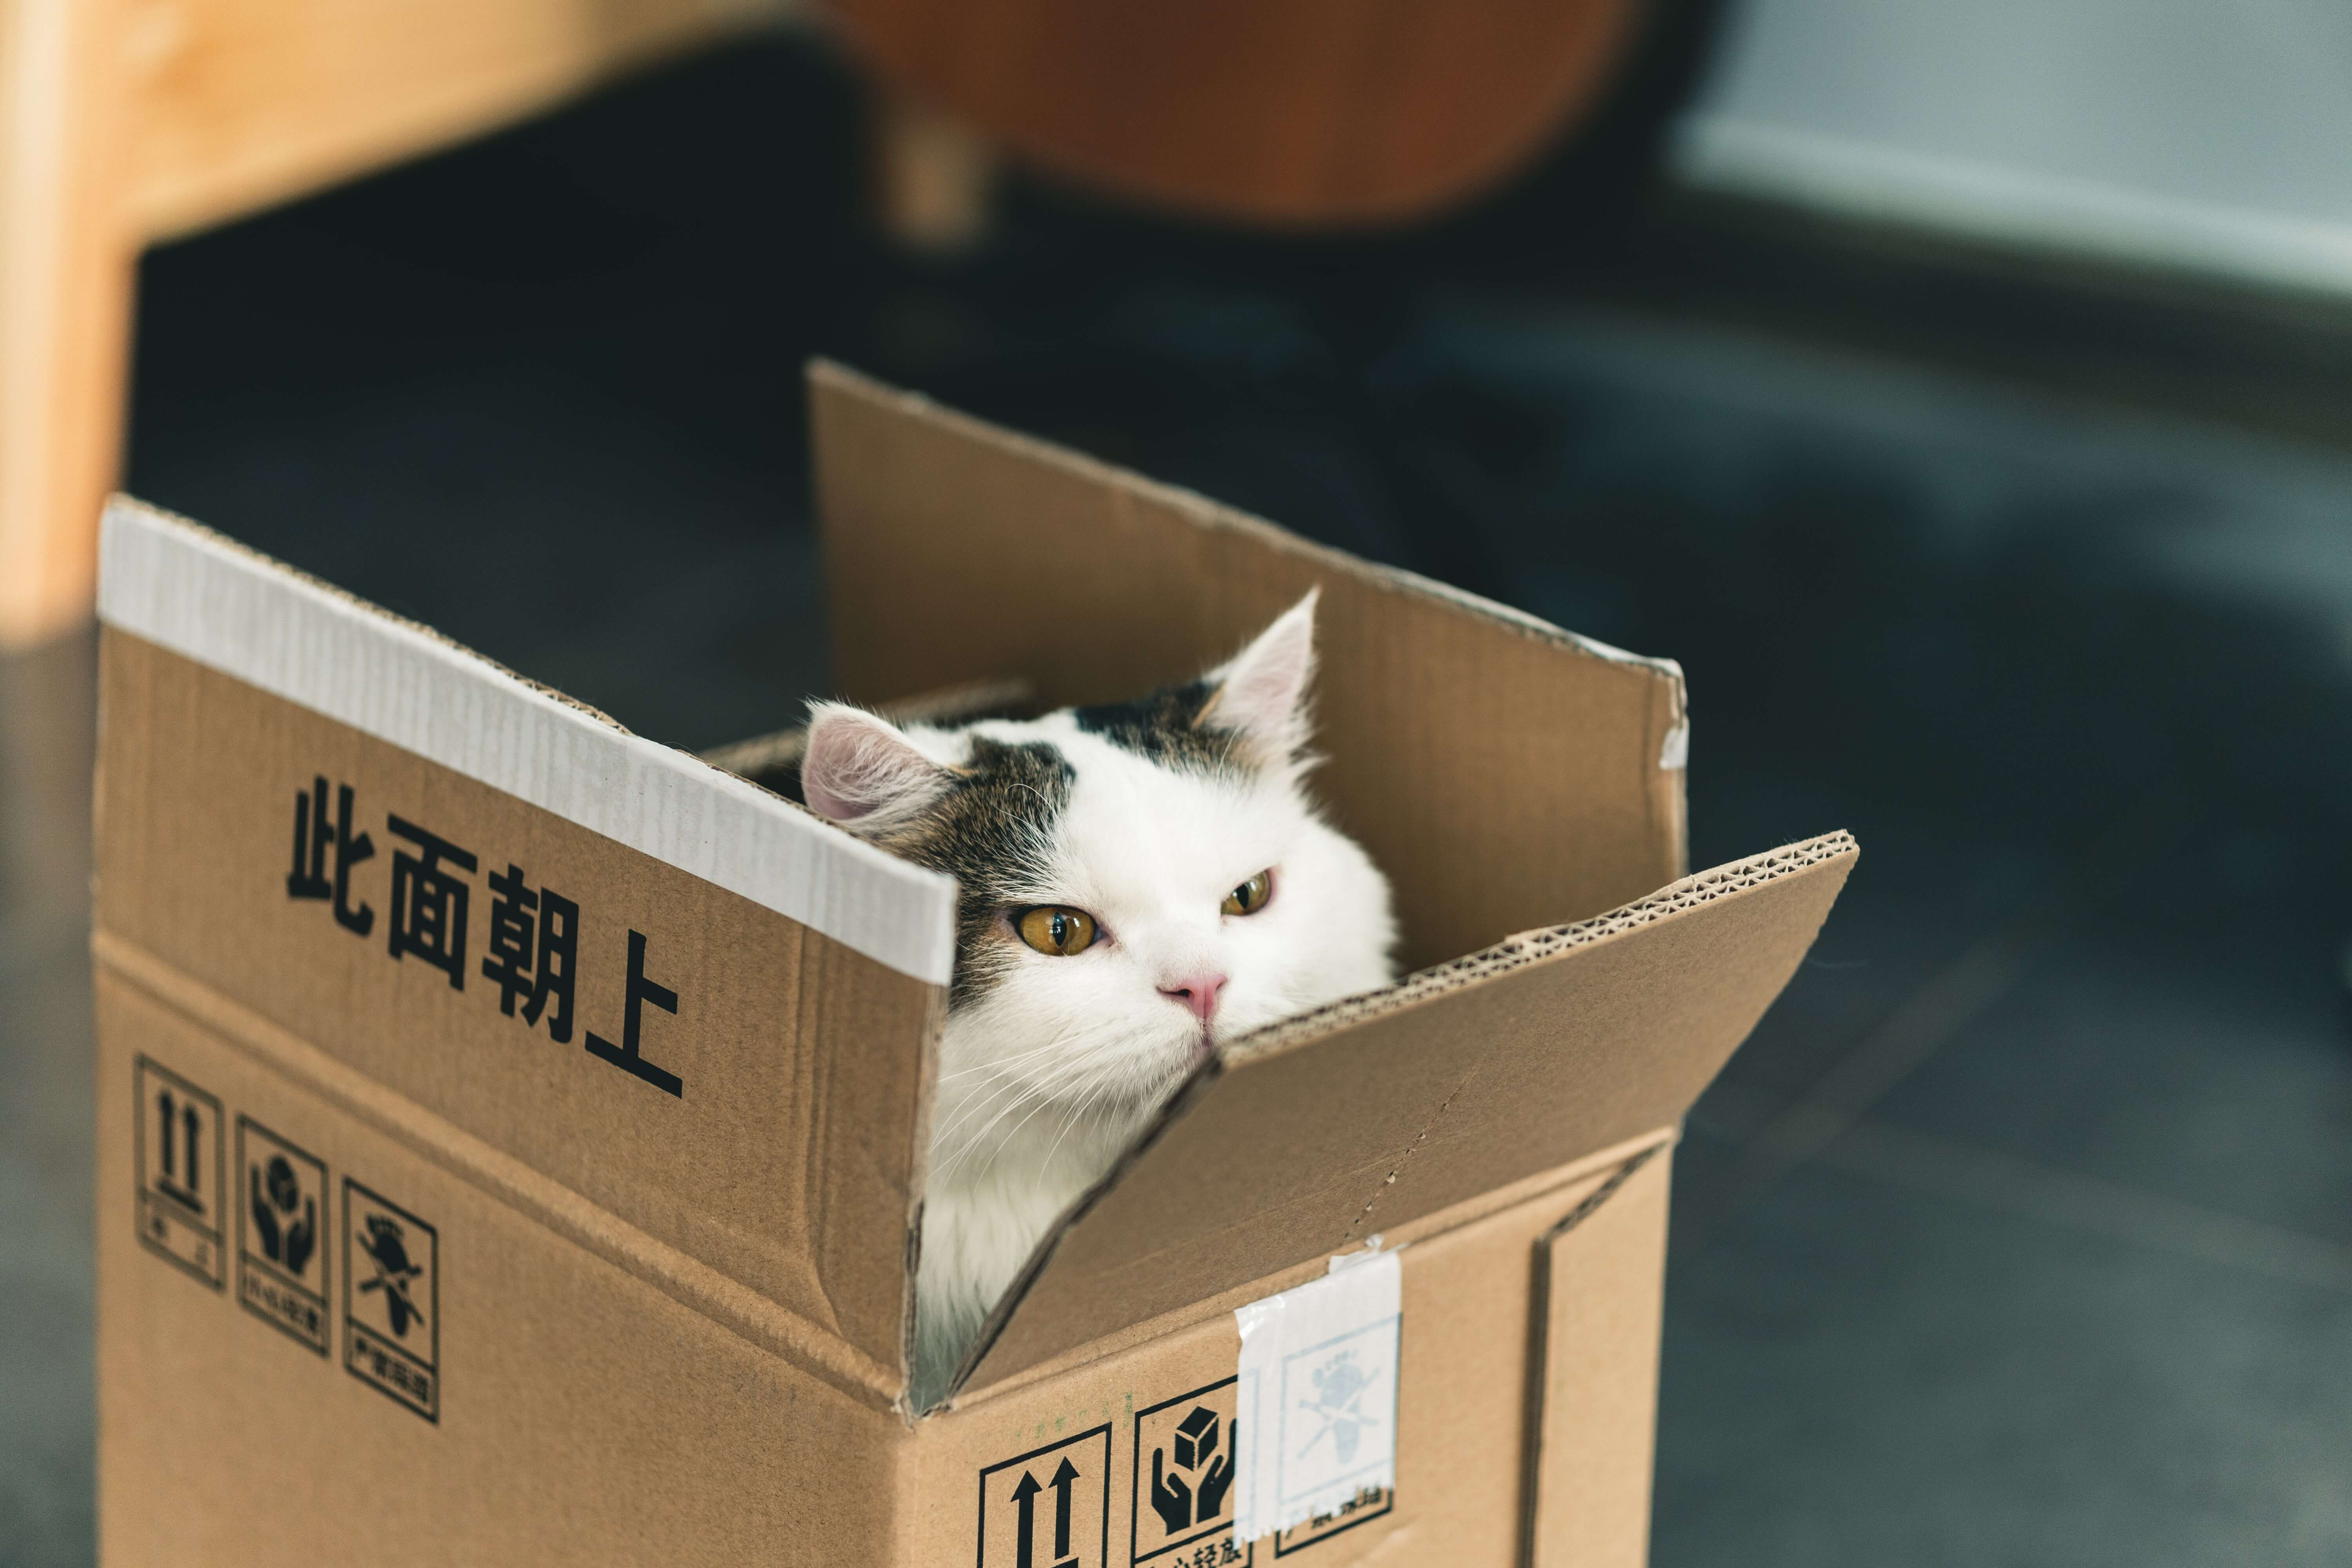 A grey and white cat peeking out of a cardboard box